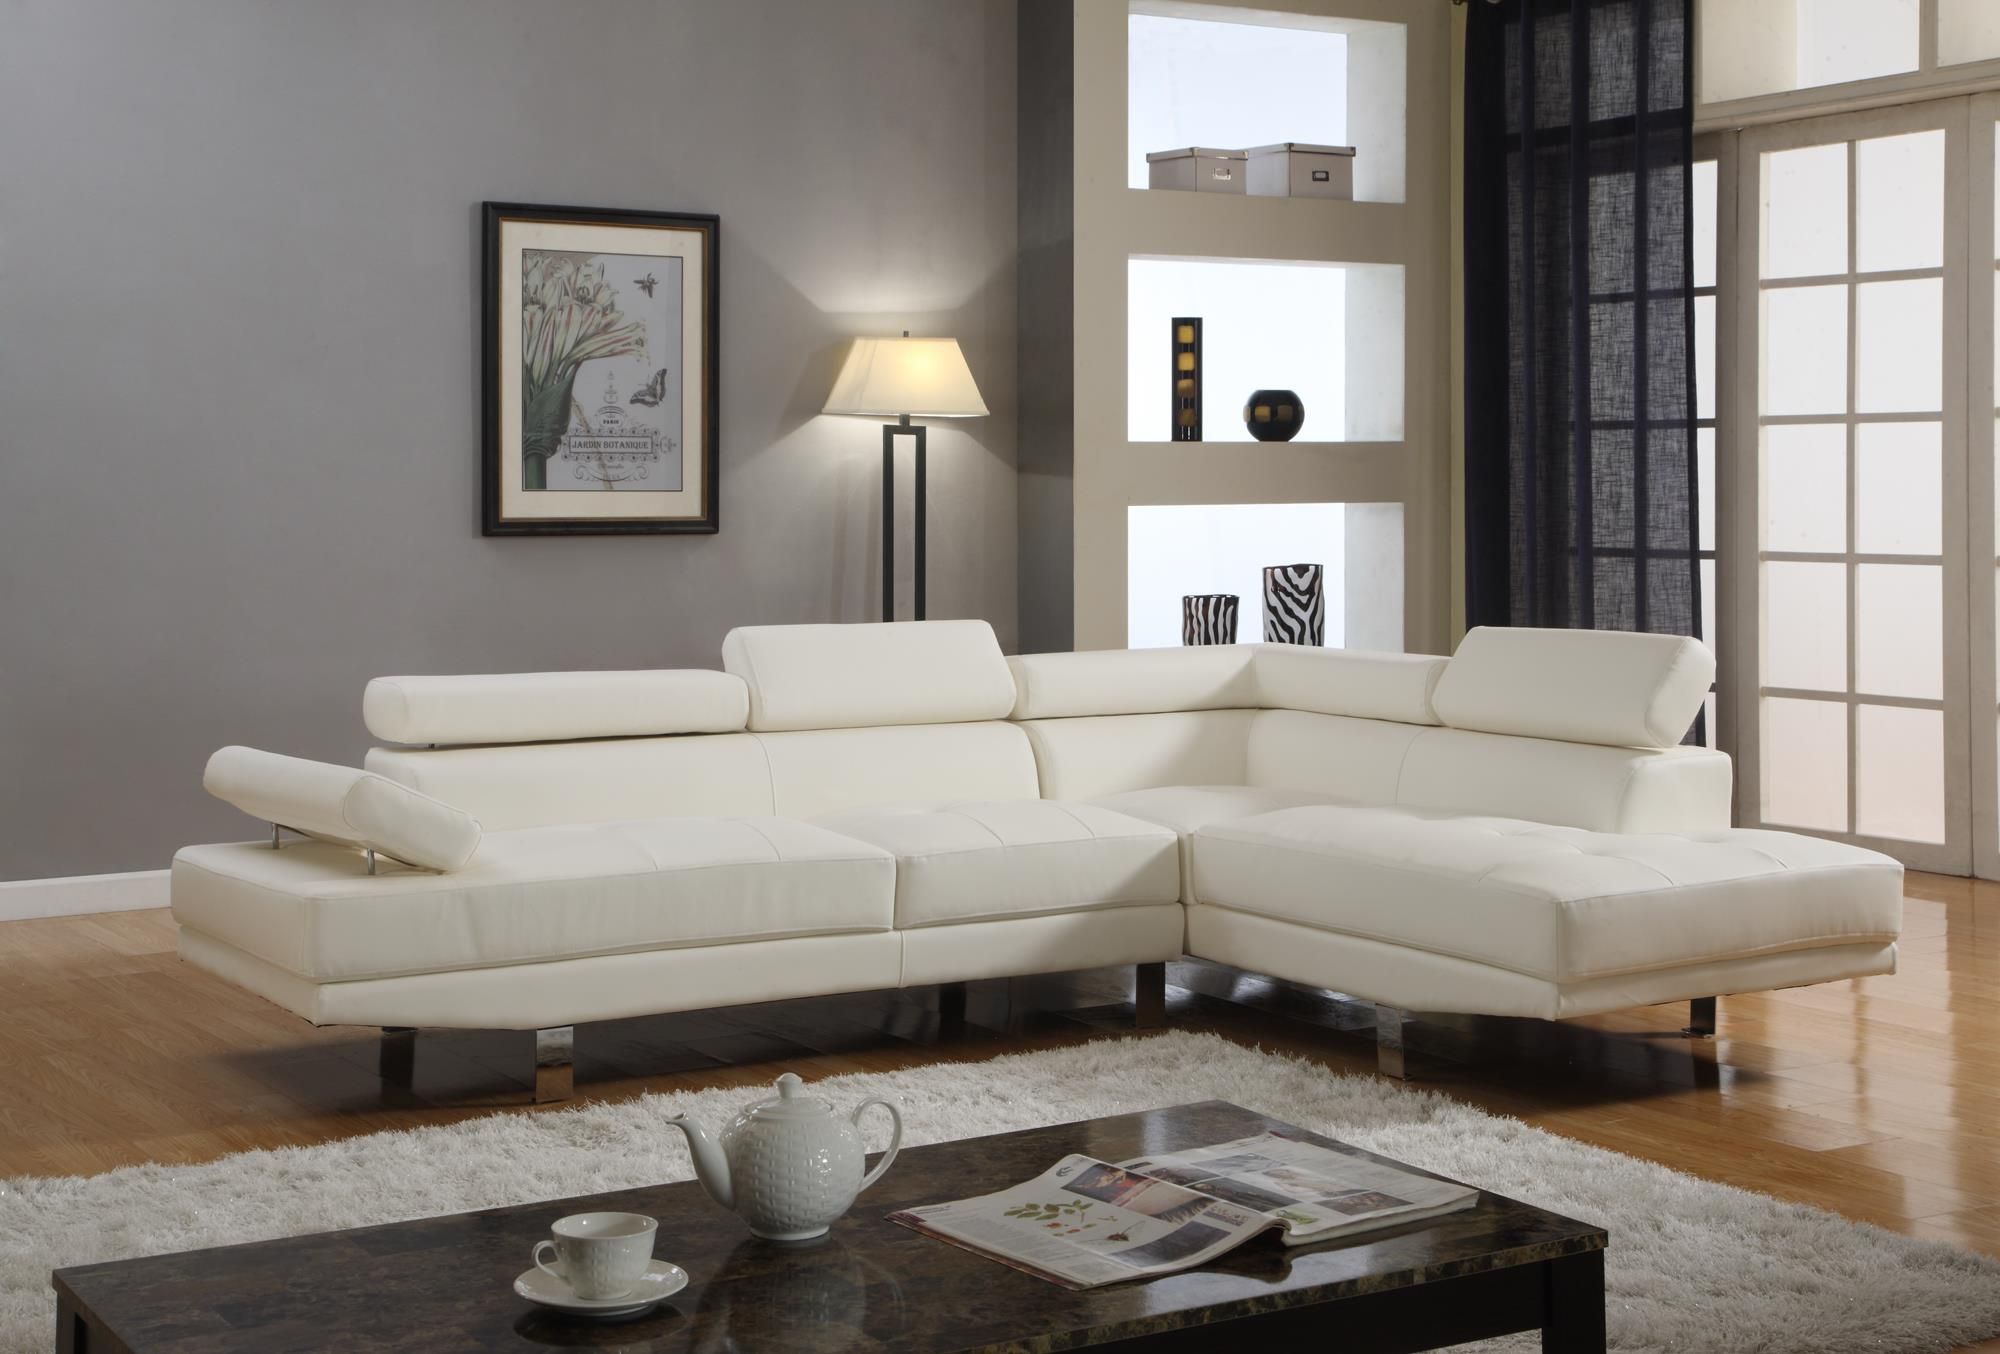 💥SPECIAL SALES 💥 SECTIONAL SOFA 🛋️ Come In Box 📦 - Free Delivery 🚚 Today To Reasonable Distance